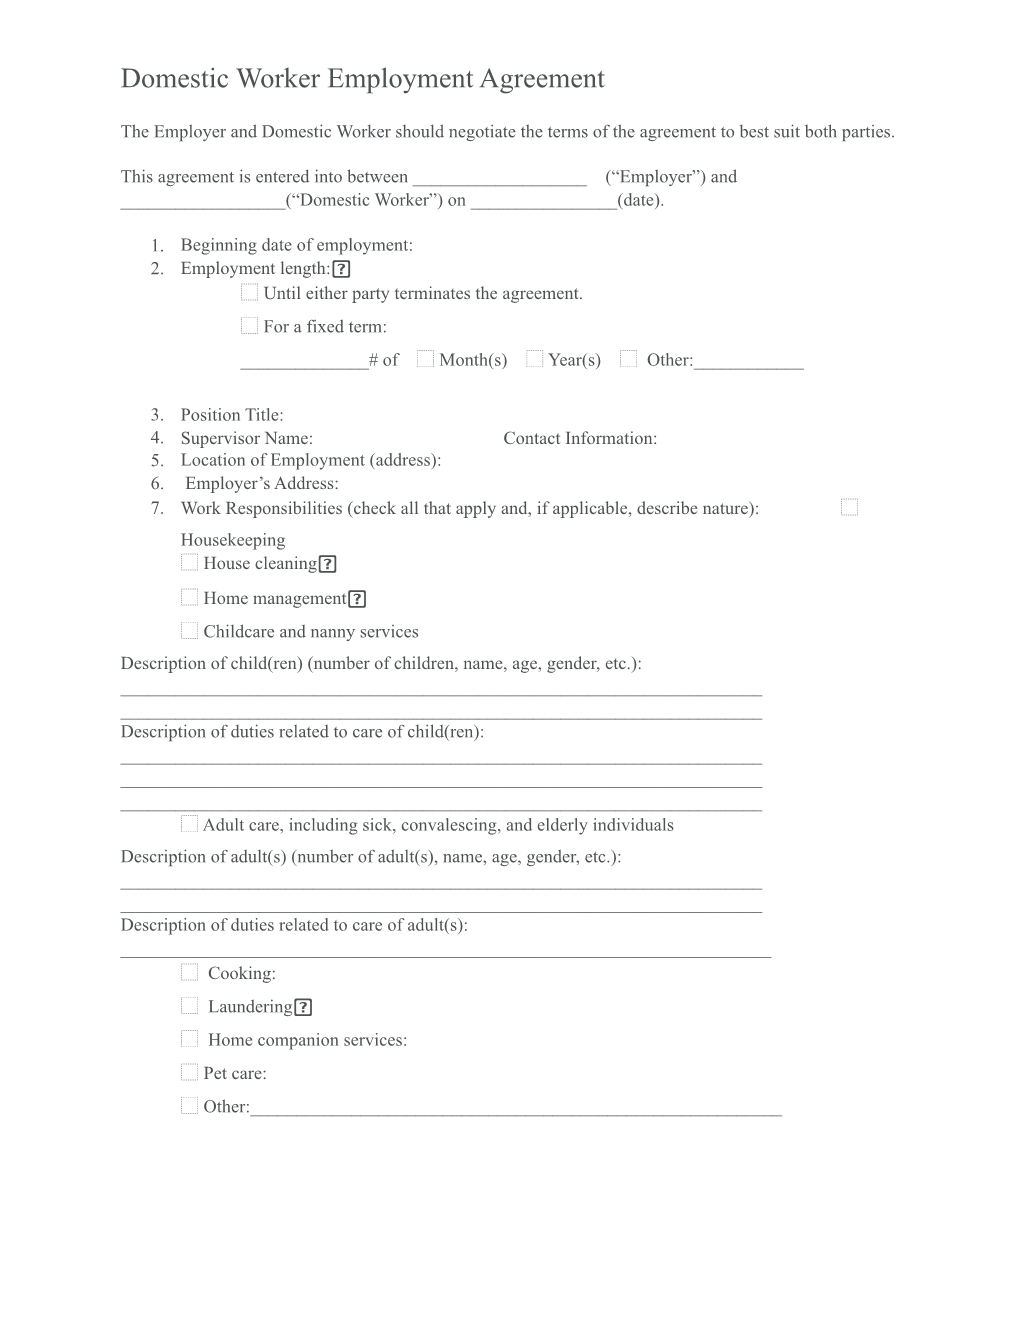 NDWA Domestic Worker Sample Contract